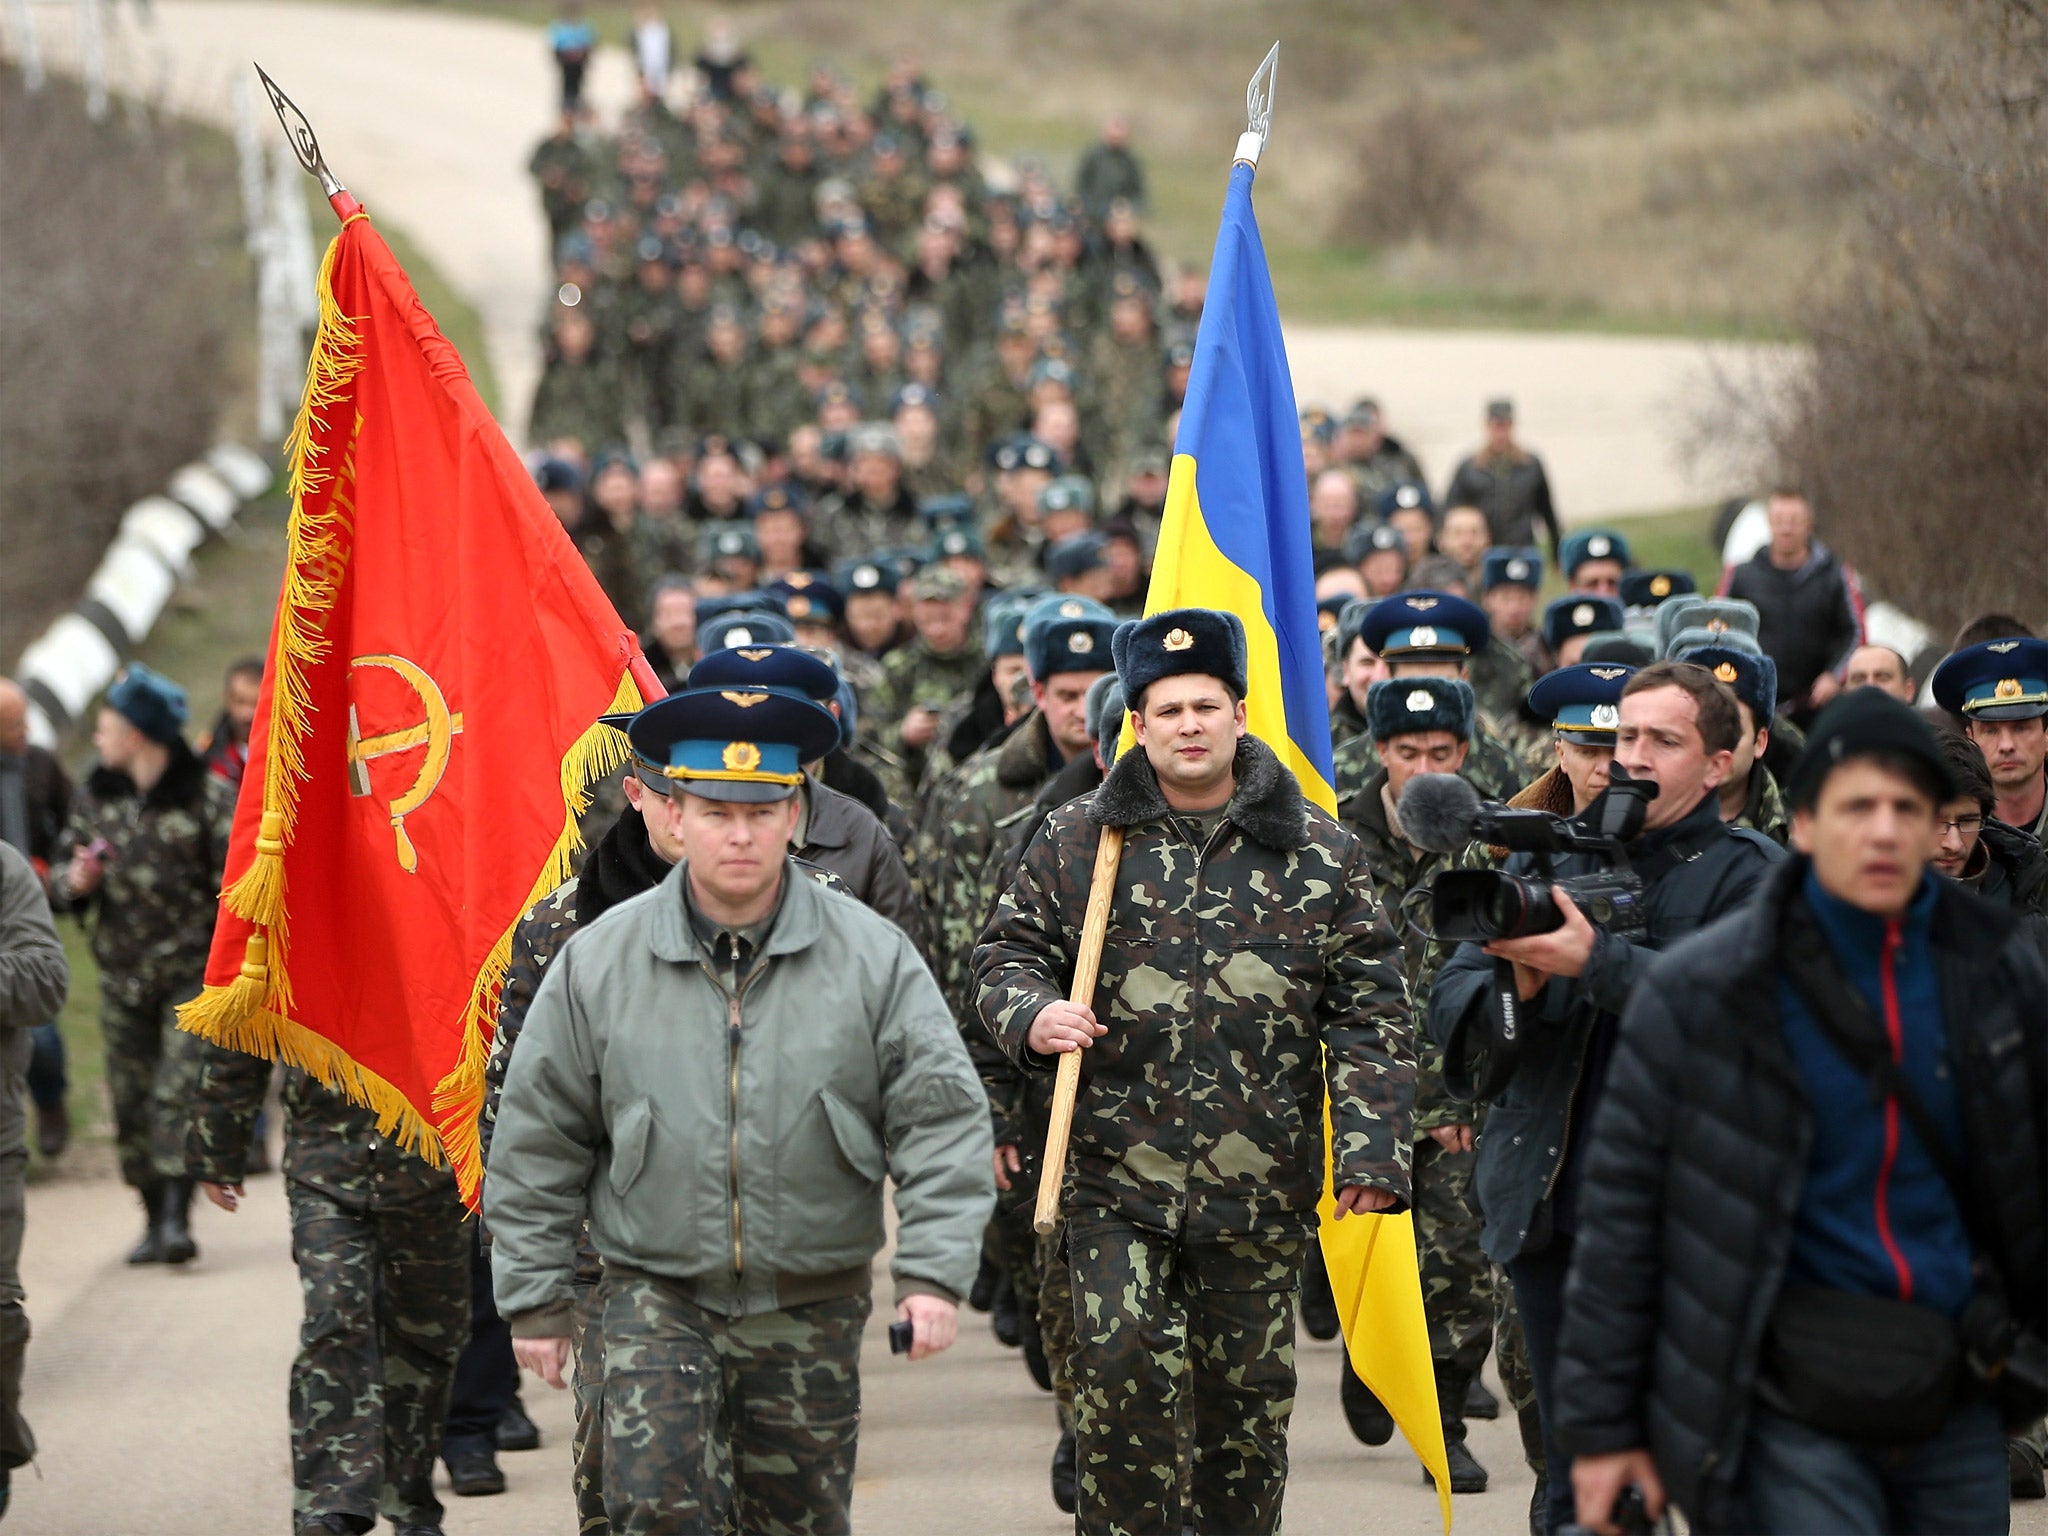 Colonel Yuli Mamchor, commander of the Ukrainian military garrison at the Belbek airbase, leads his unarmed troops to retake the Belbek airfield from soldiers under Russian command in Crimea